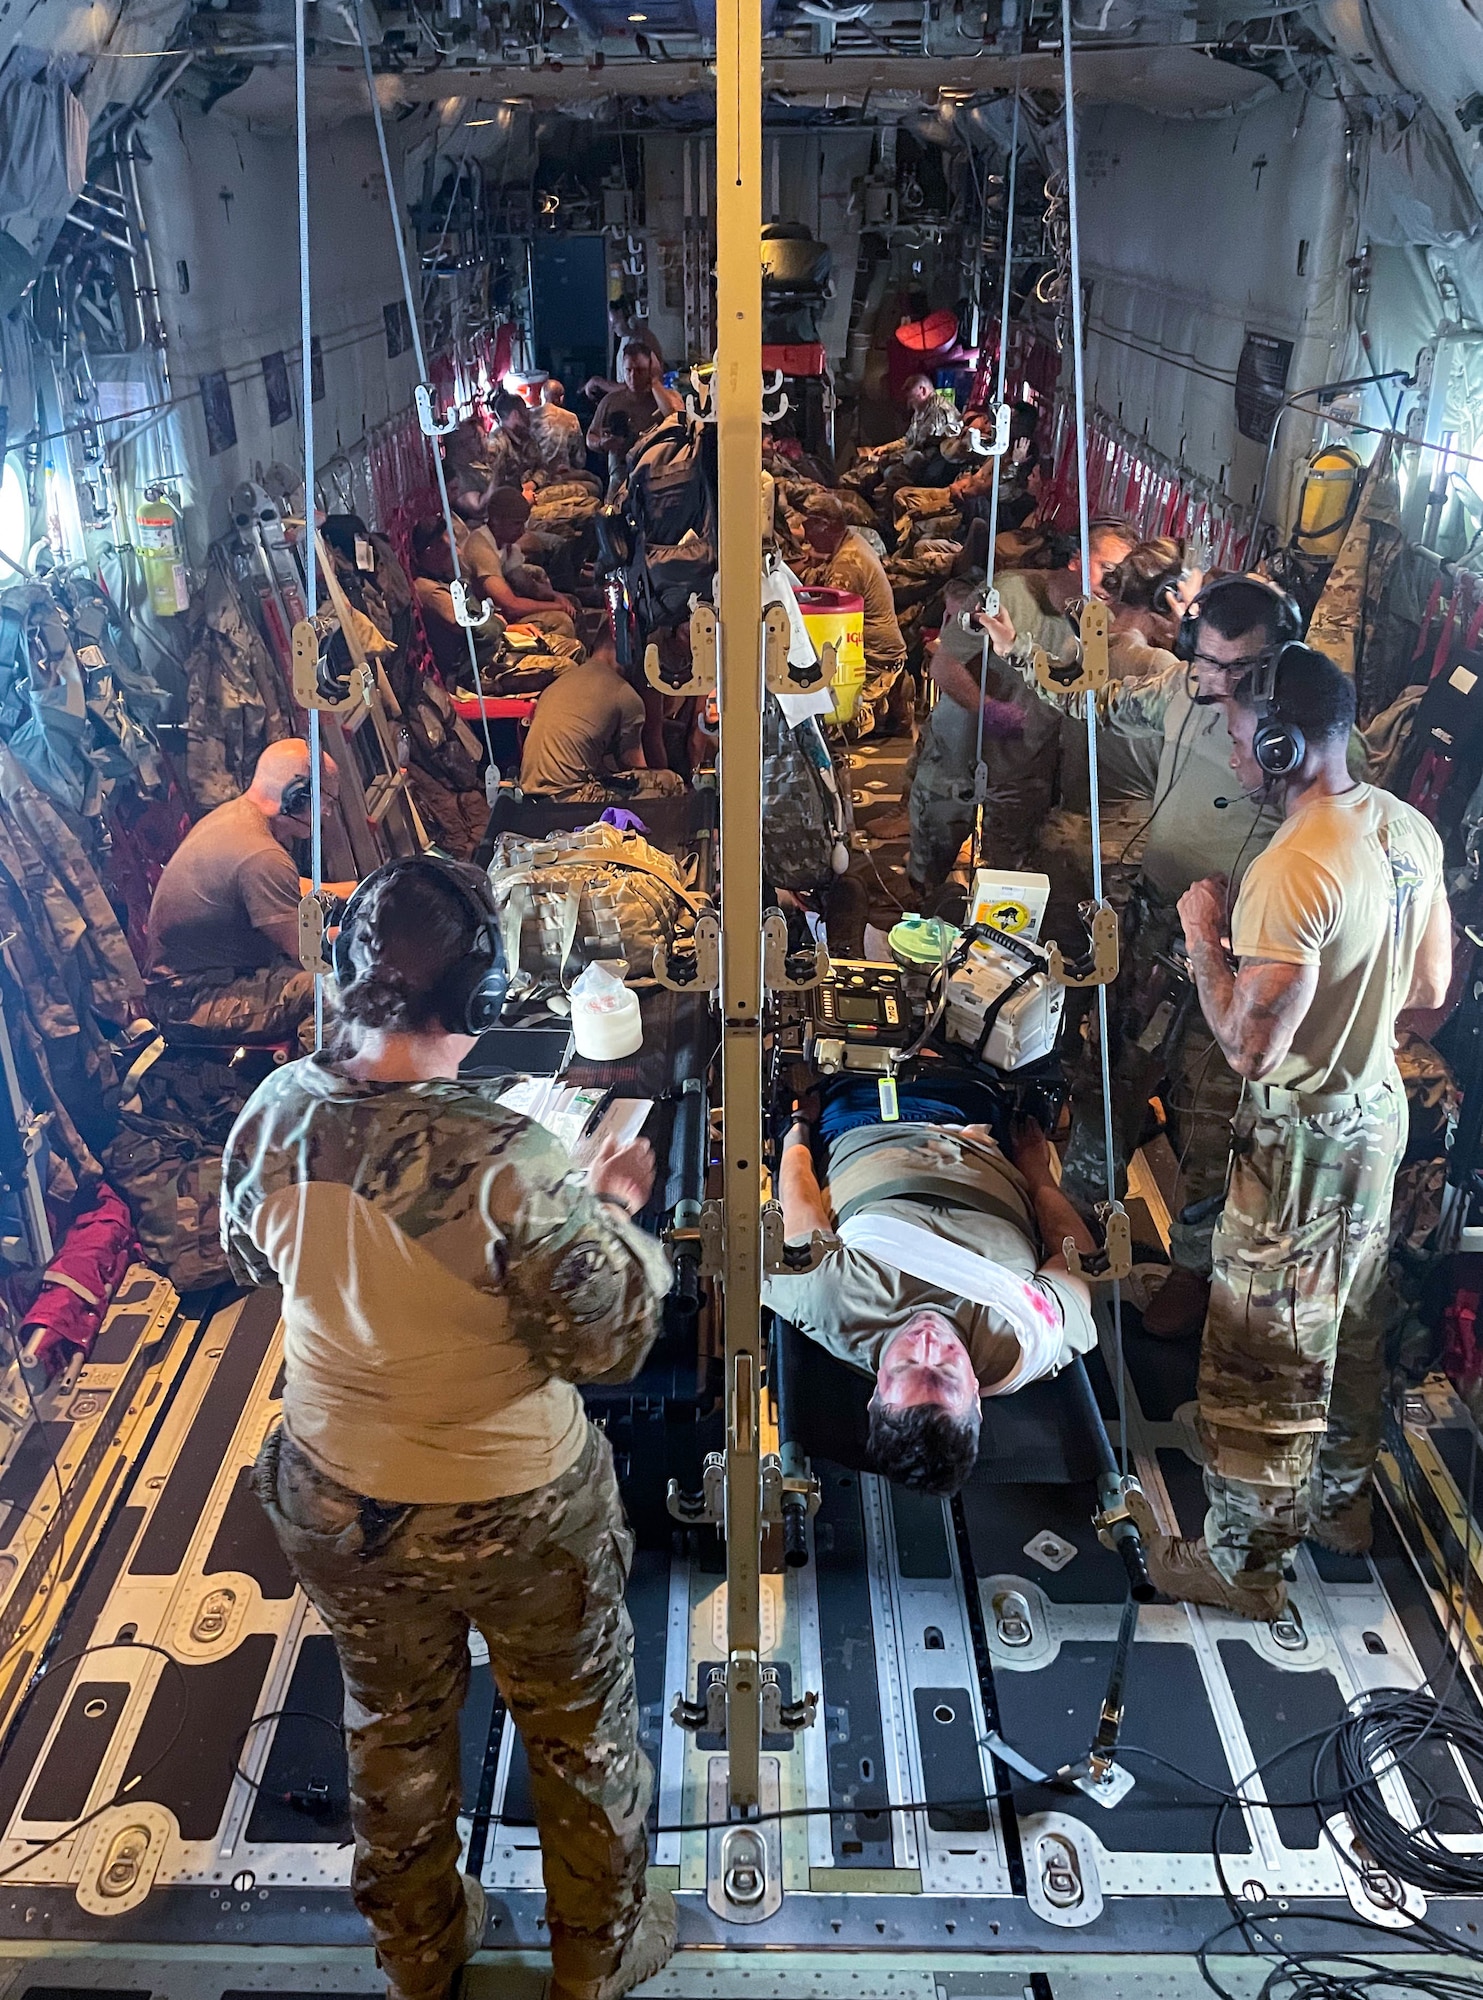 920th Aeromedical Staging Squadron, 315th Aeromedical Evacuation Squadron, and 943rd Rescue Group Airmen perform unregulated patient movement and intubation training in an HC-130J Combat King II during exercise Distant Horizon Aug. 6, 2022. Distant Horizon is an exercise designed to validate tactics, techniques, and procedures of personnel recovery and agile combat employment in the Indo-Pacific region. (U.S. Air Force photo by Staff Sgt. Darius Sostre-Miroir)